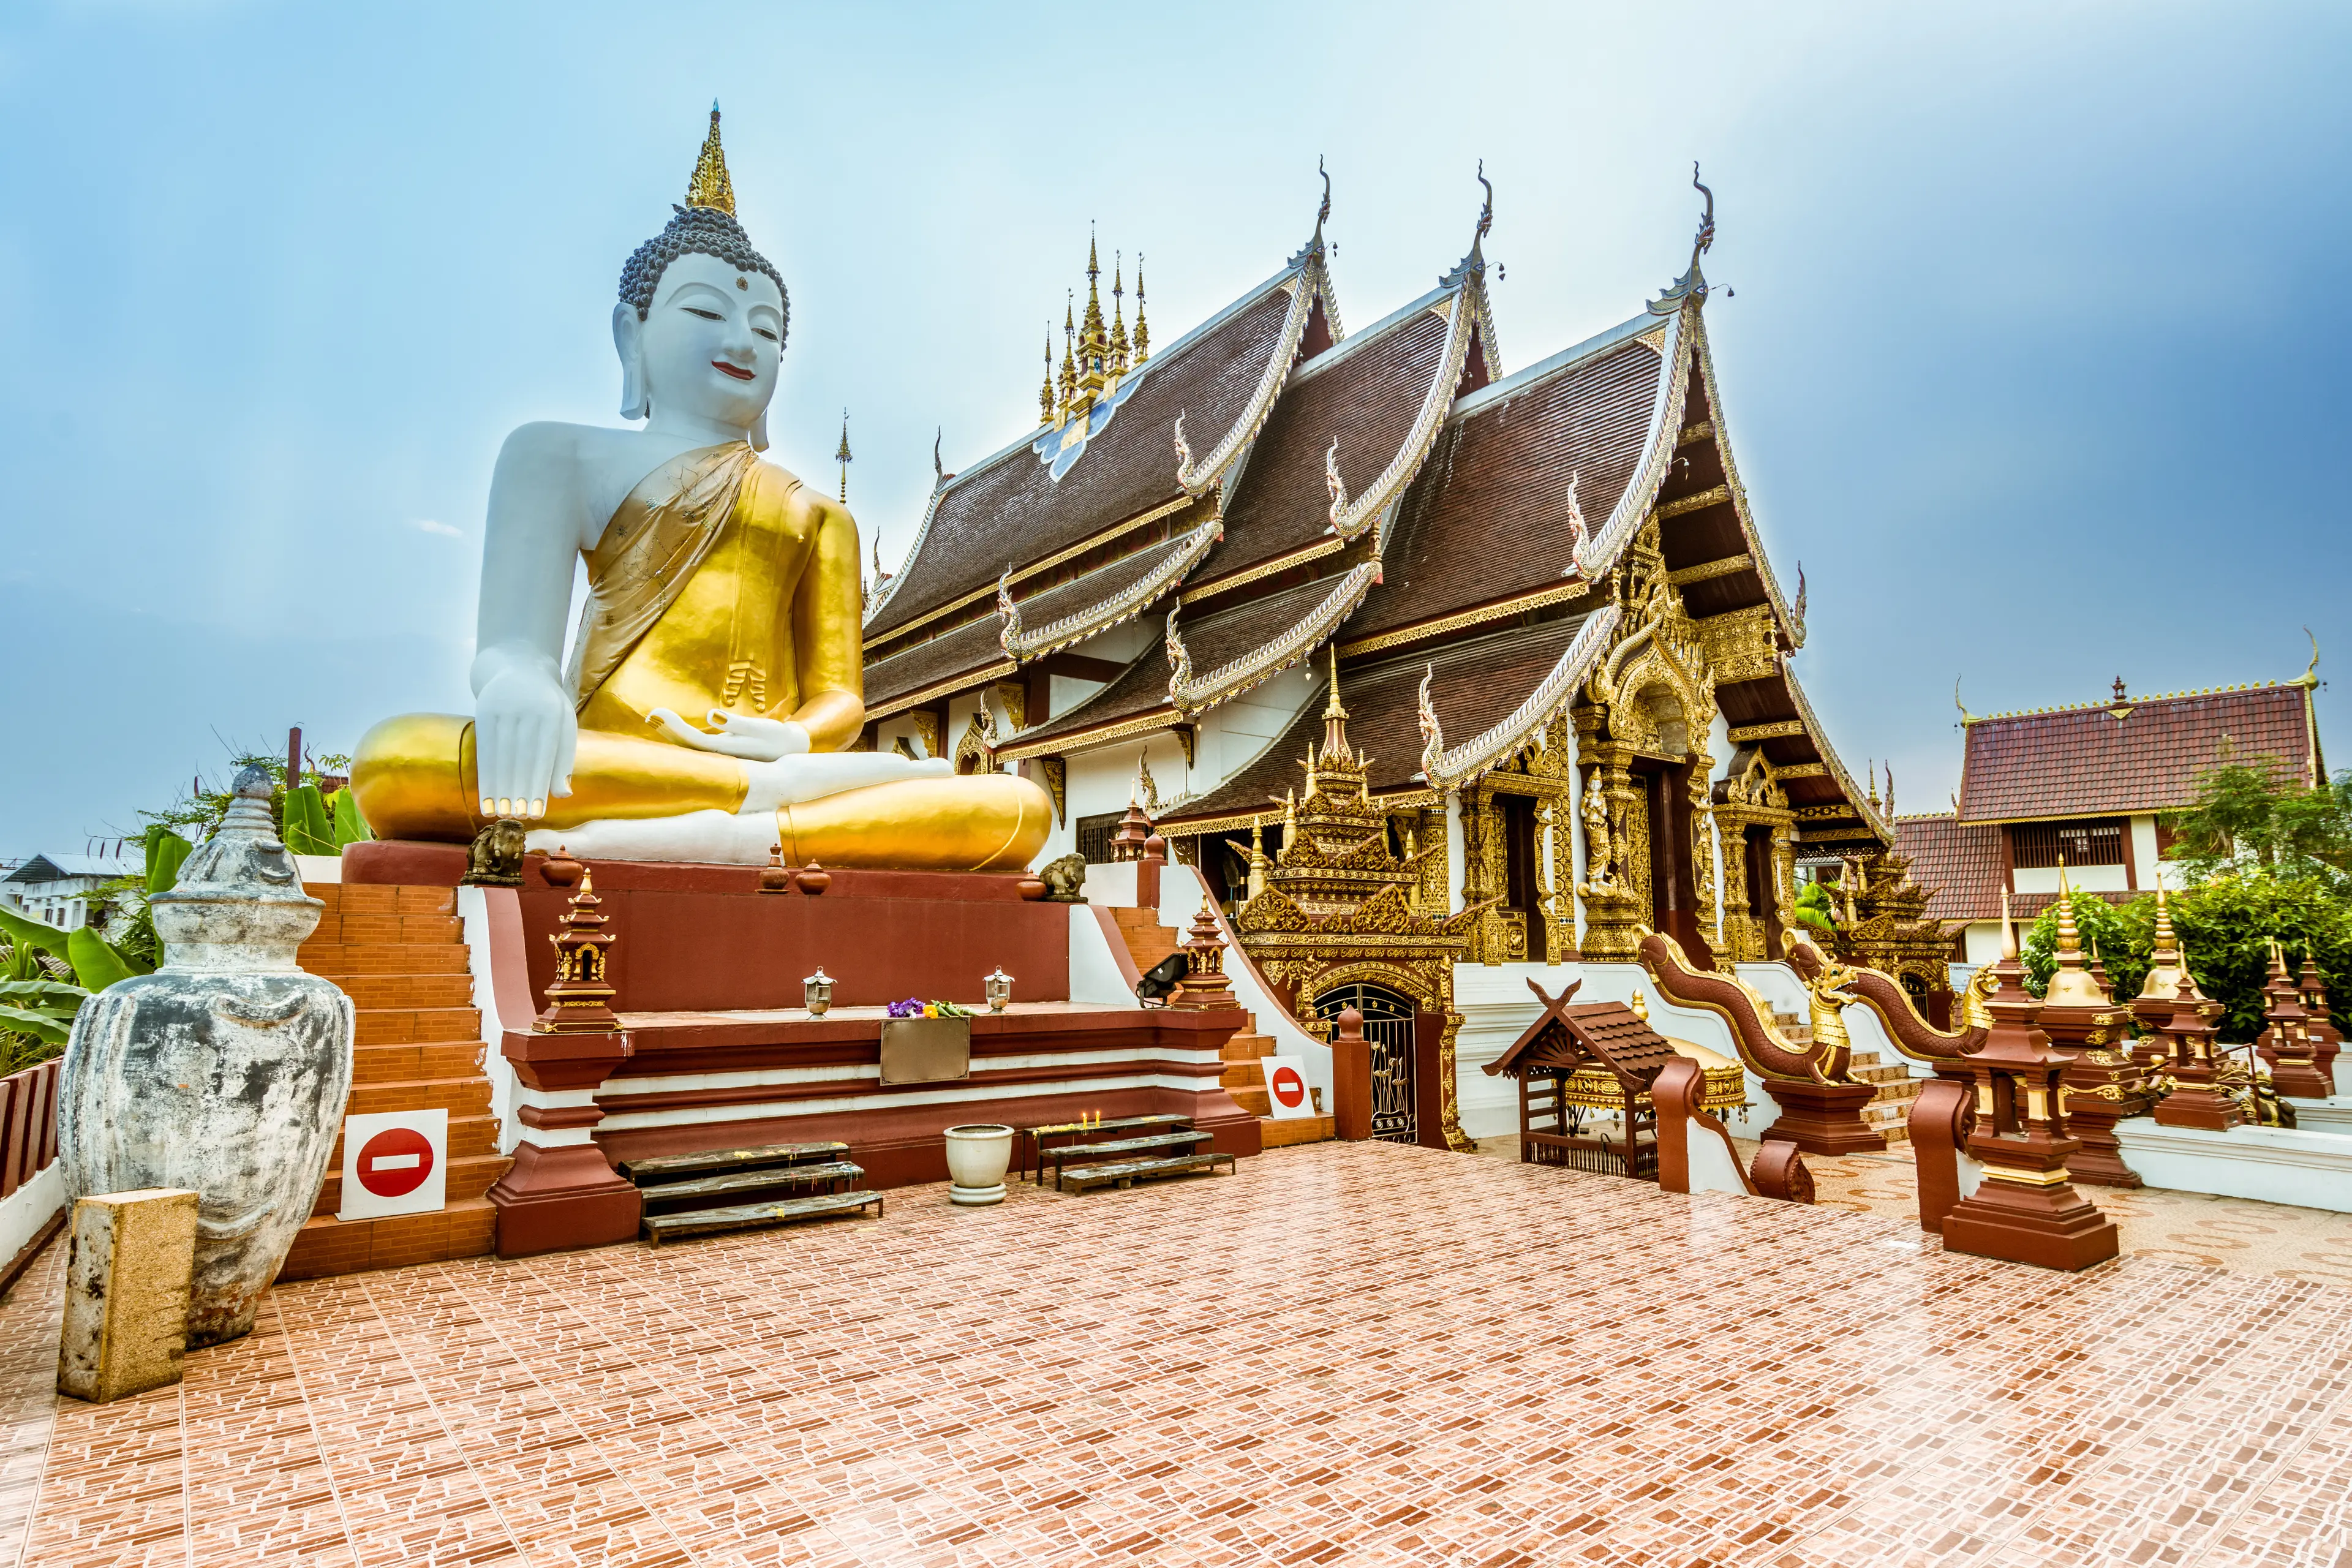 4-Day Local-style Chiang Mai Adventure: Nightlife, Cuisine & Shopping